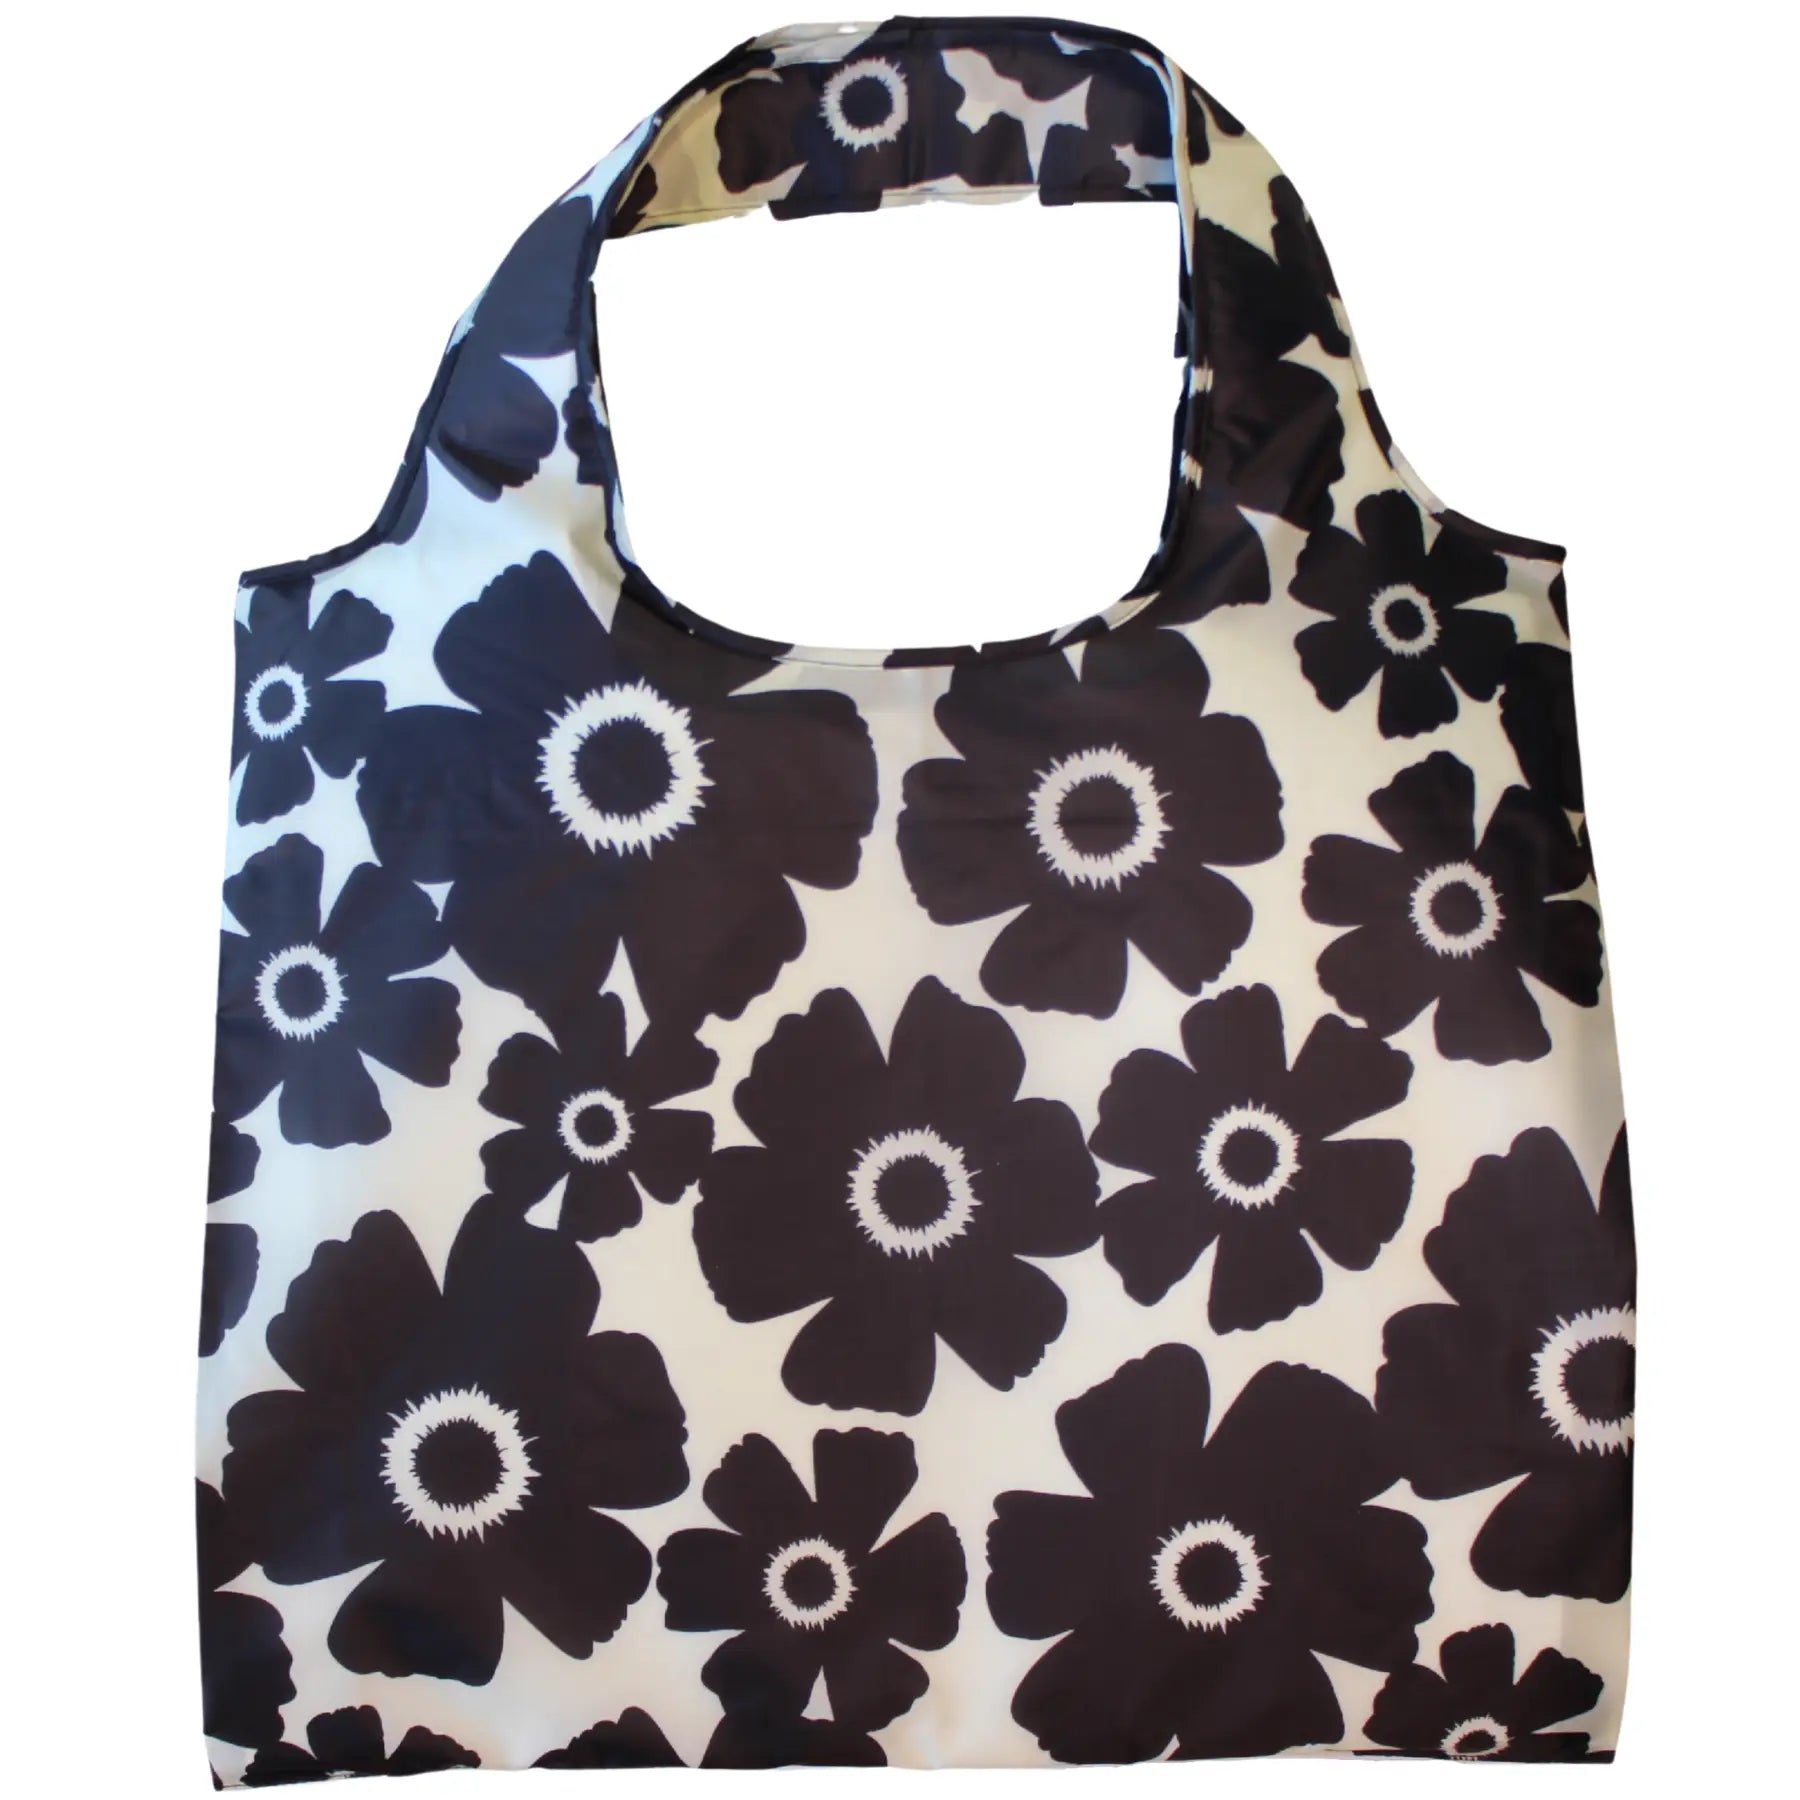 Reusable Water-resistant Tote